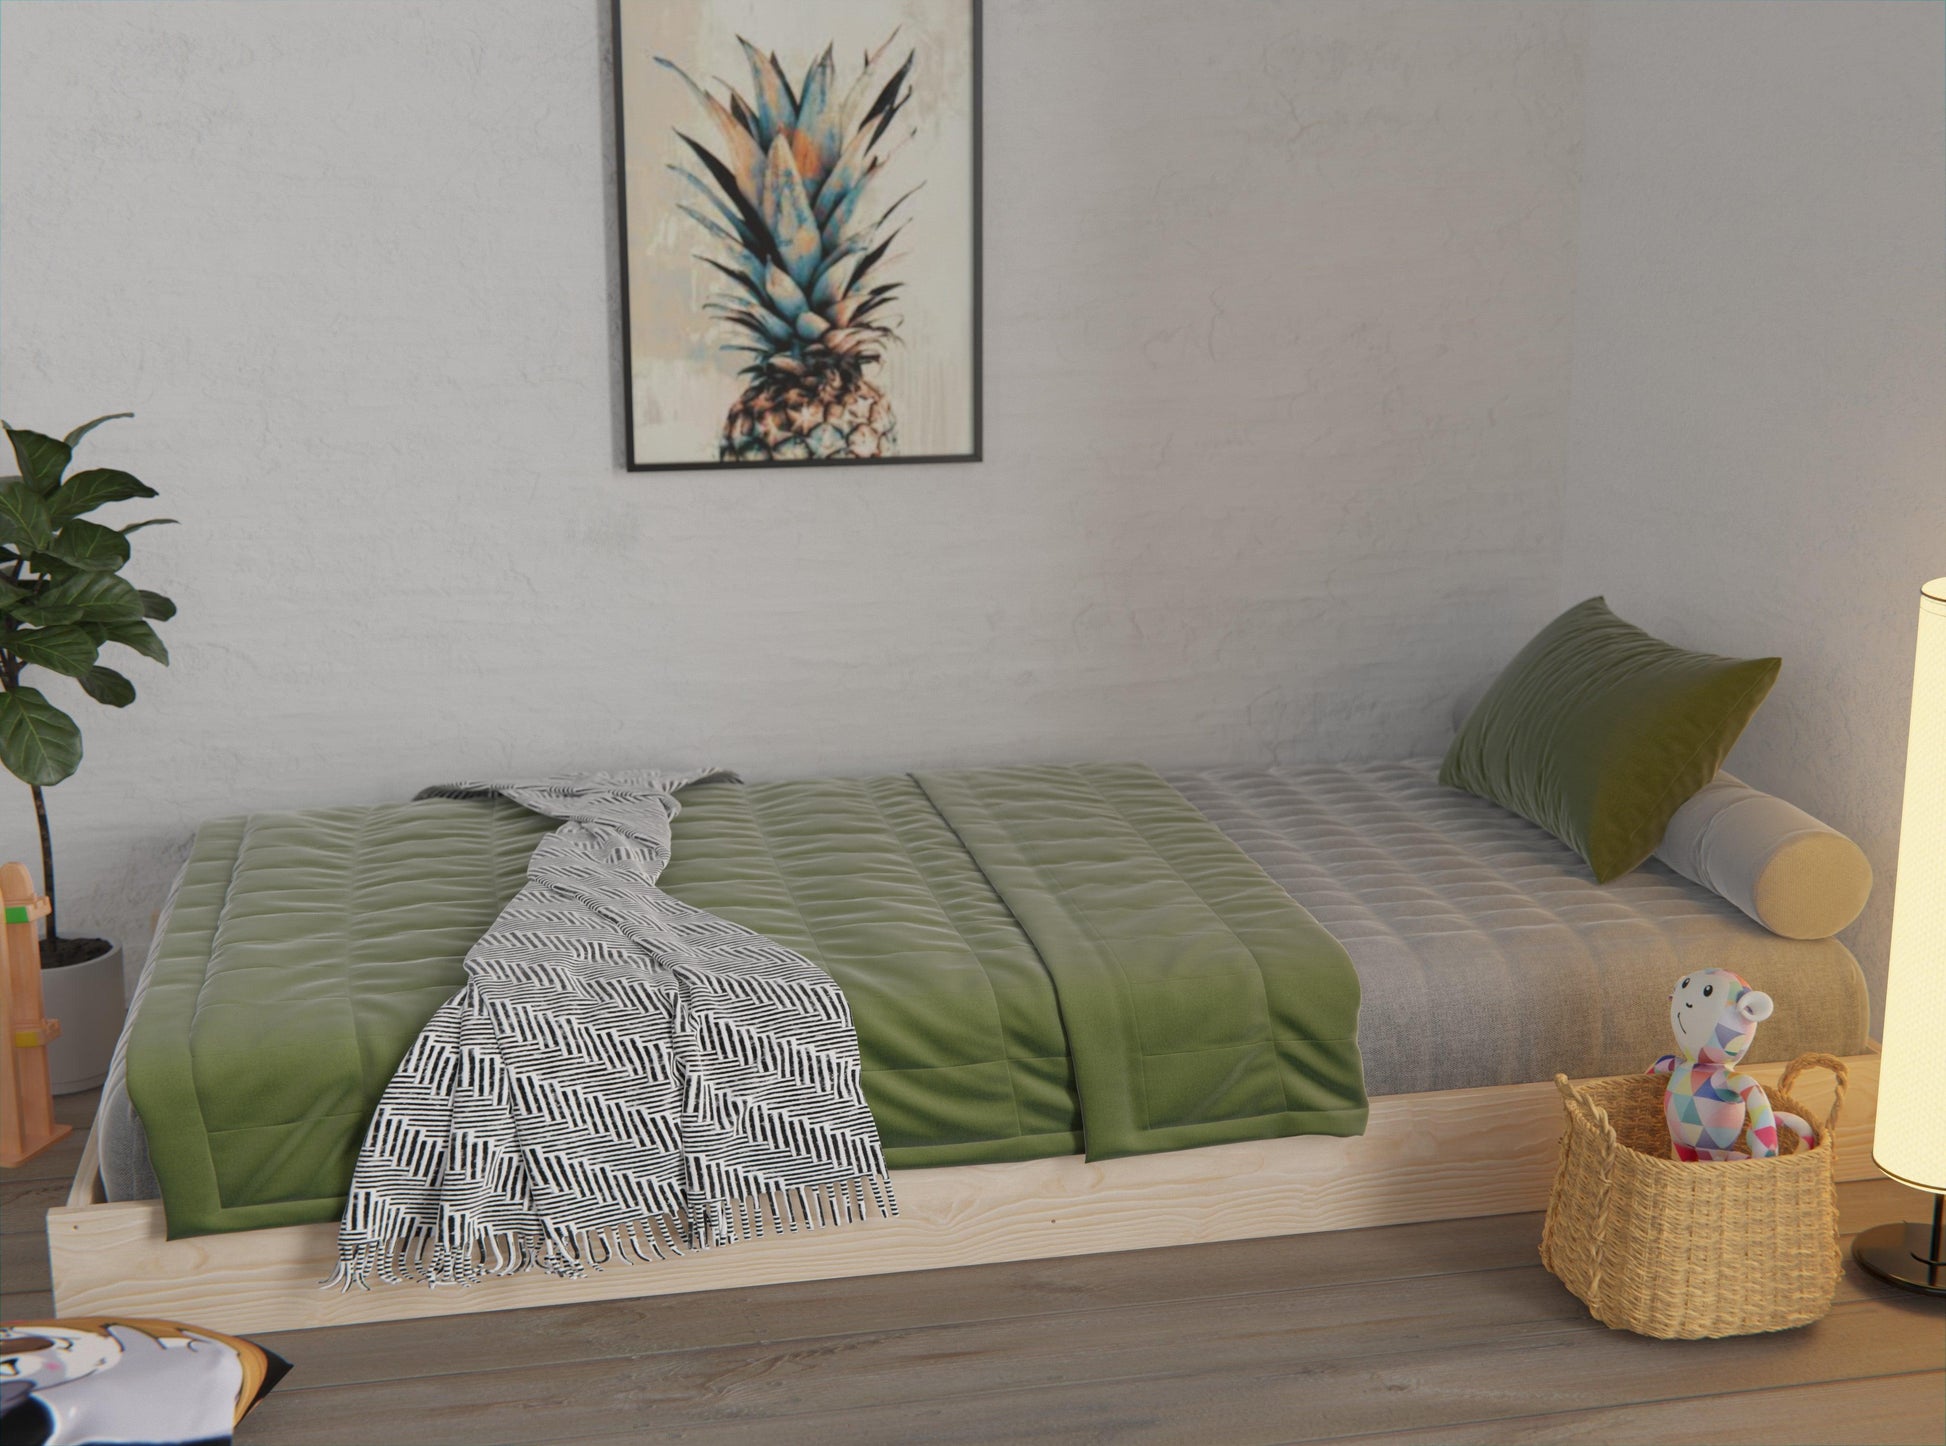 Wooden kids beds: Sustainable, secure, and comfortable.